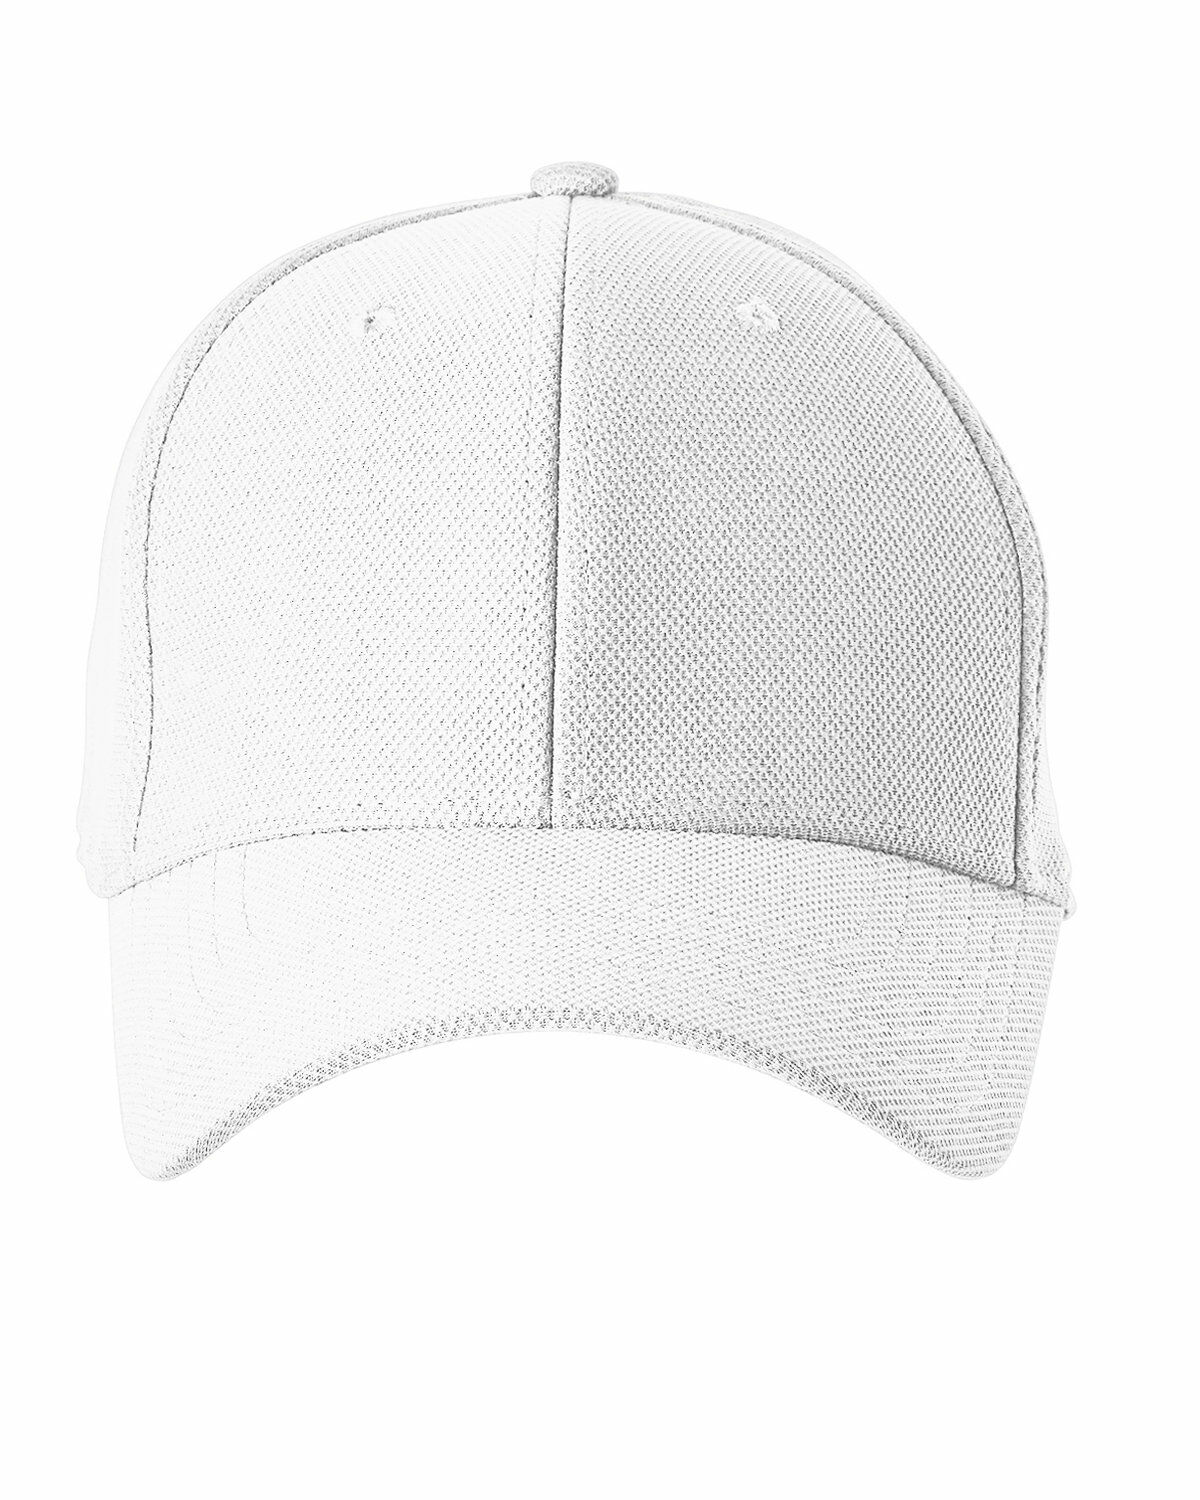 Branded Under Armour Unisex Blitzing Curved Cap White